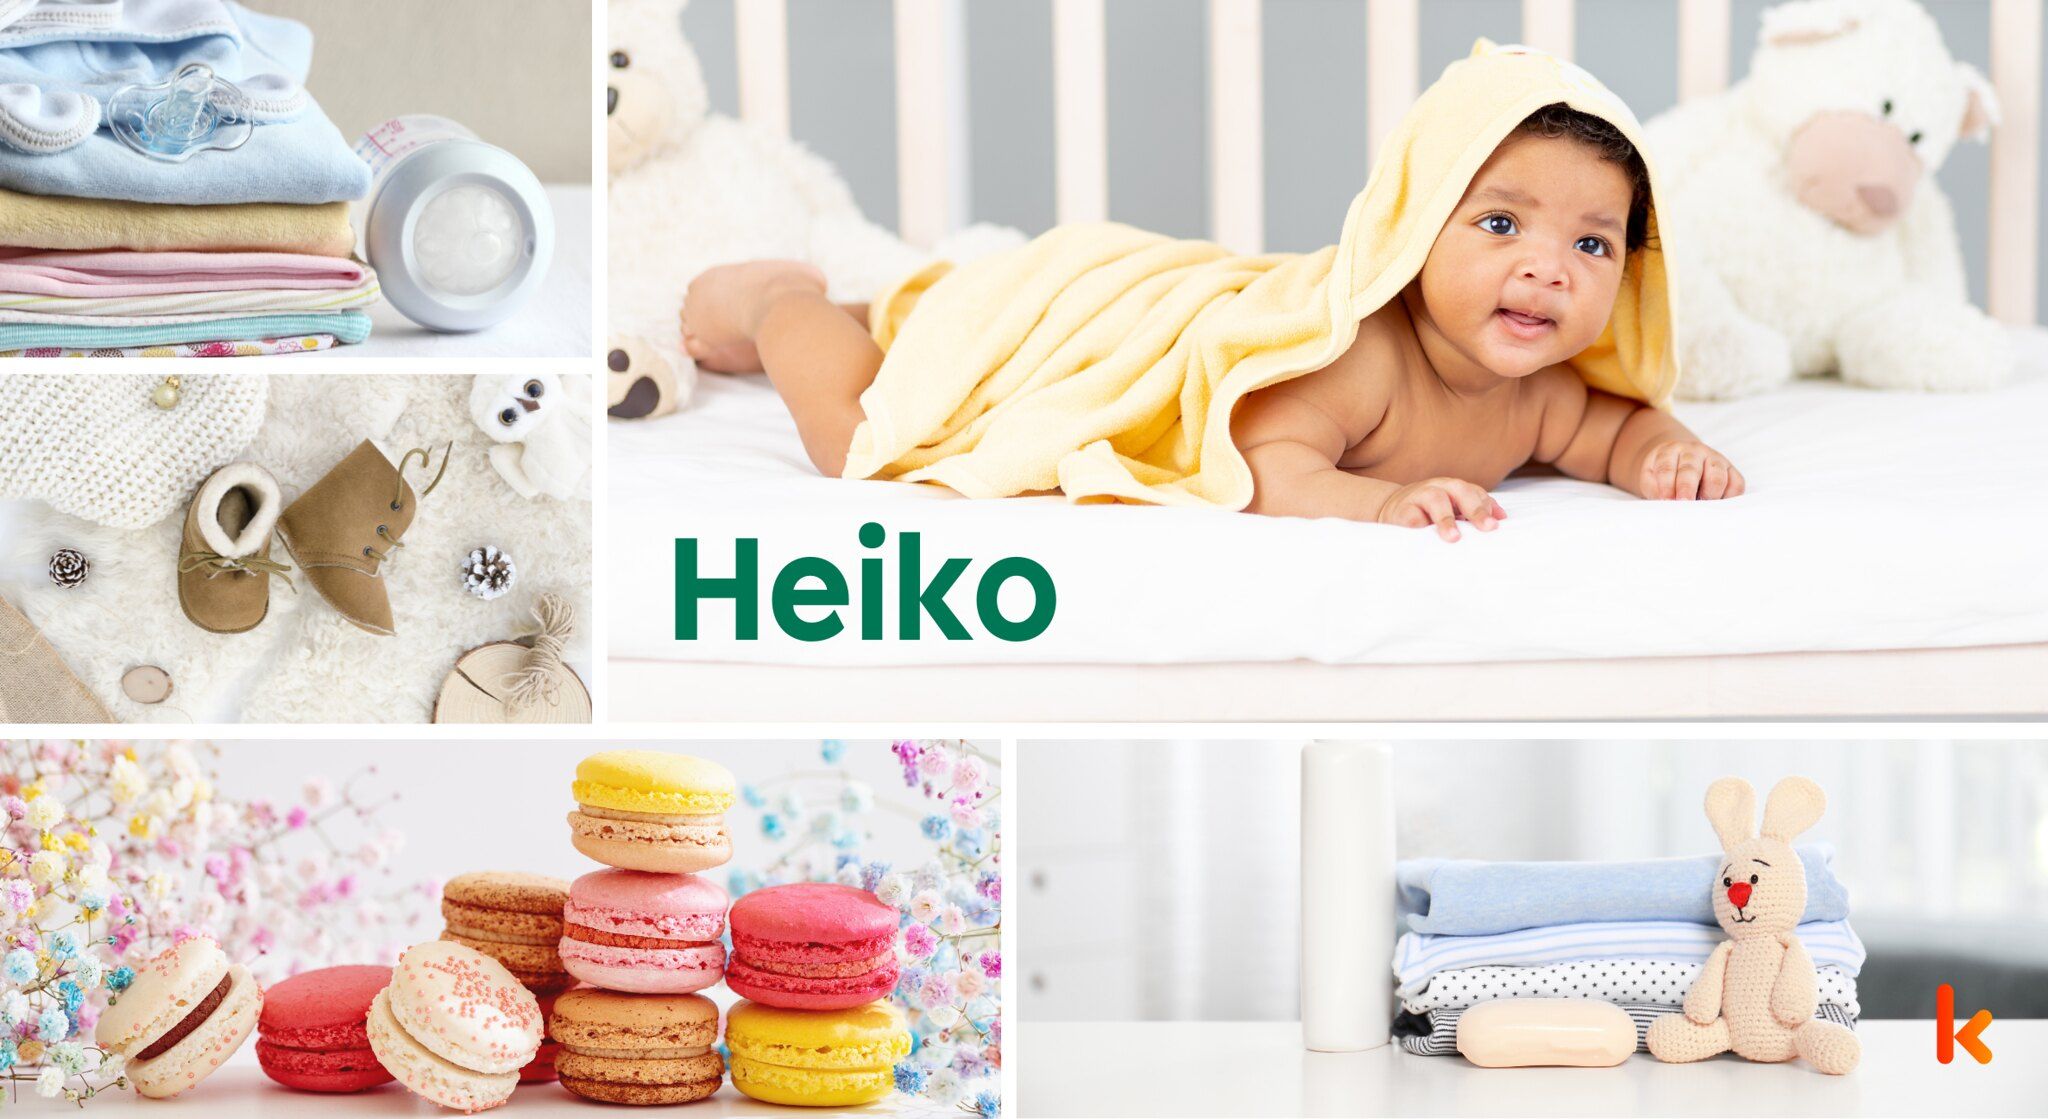 Meaning of the name Heiko